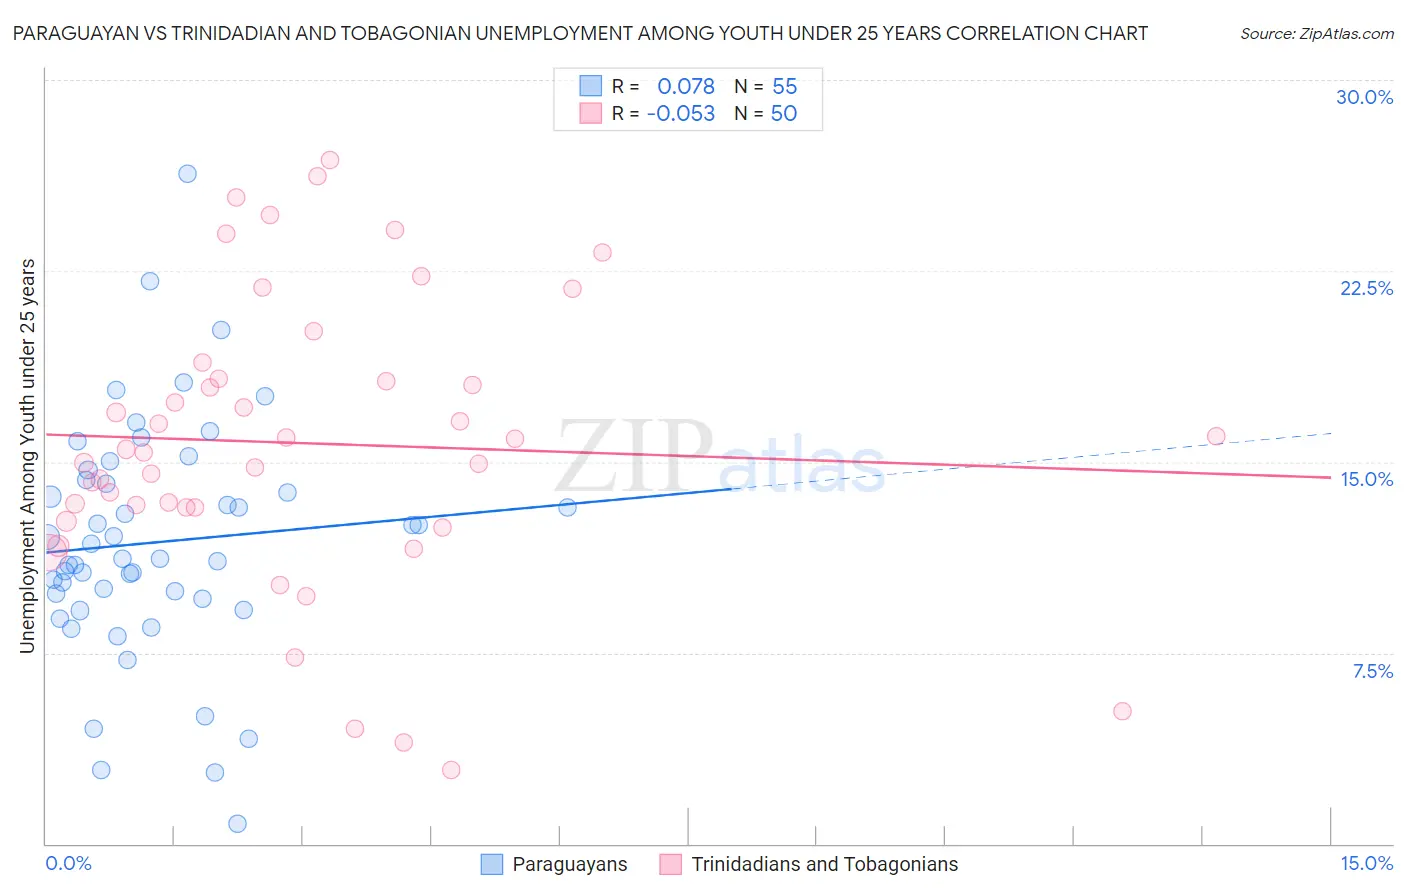 Paraguayan vs Trinidadian and Tobagonian Unemployment Among Youth under 25 years